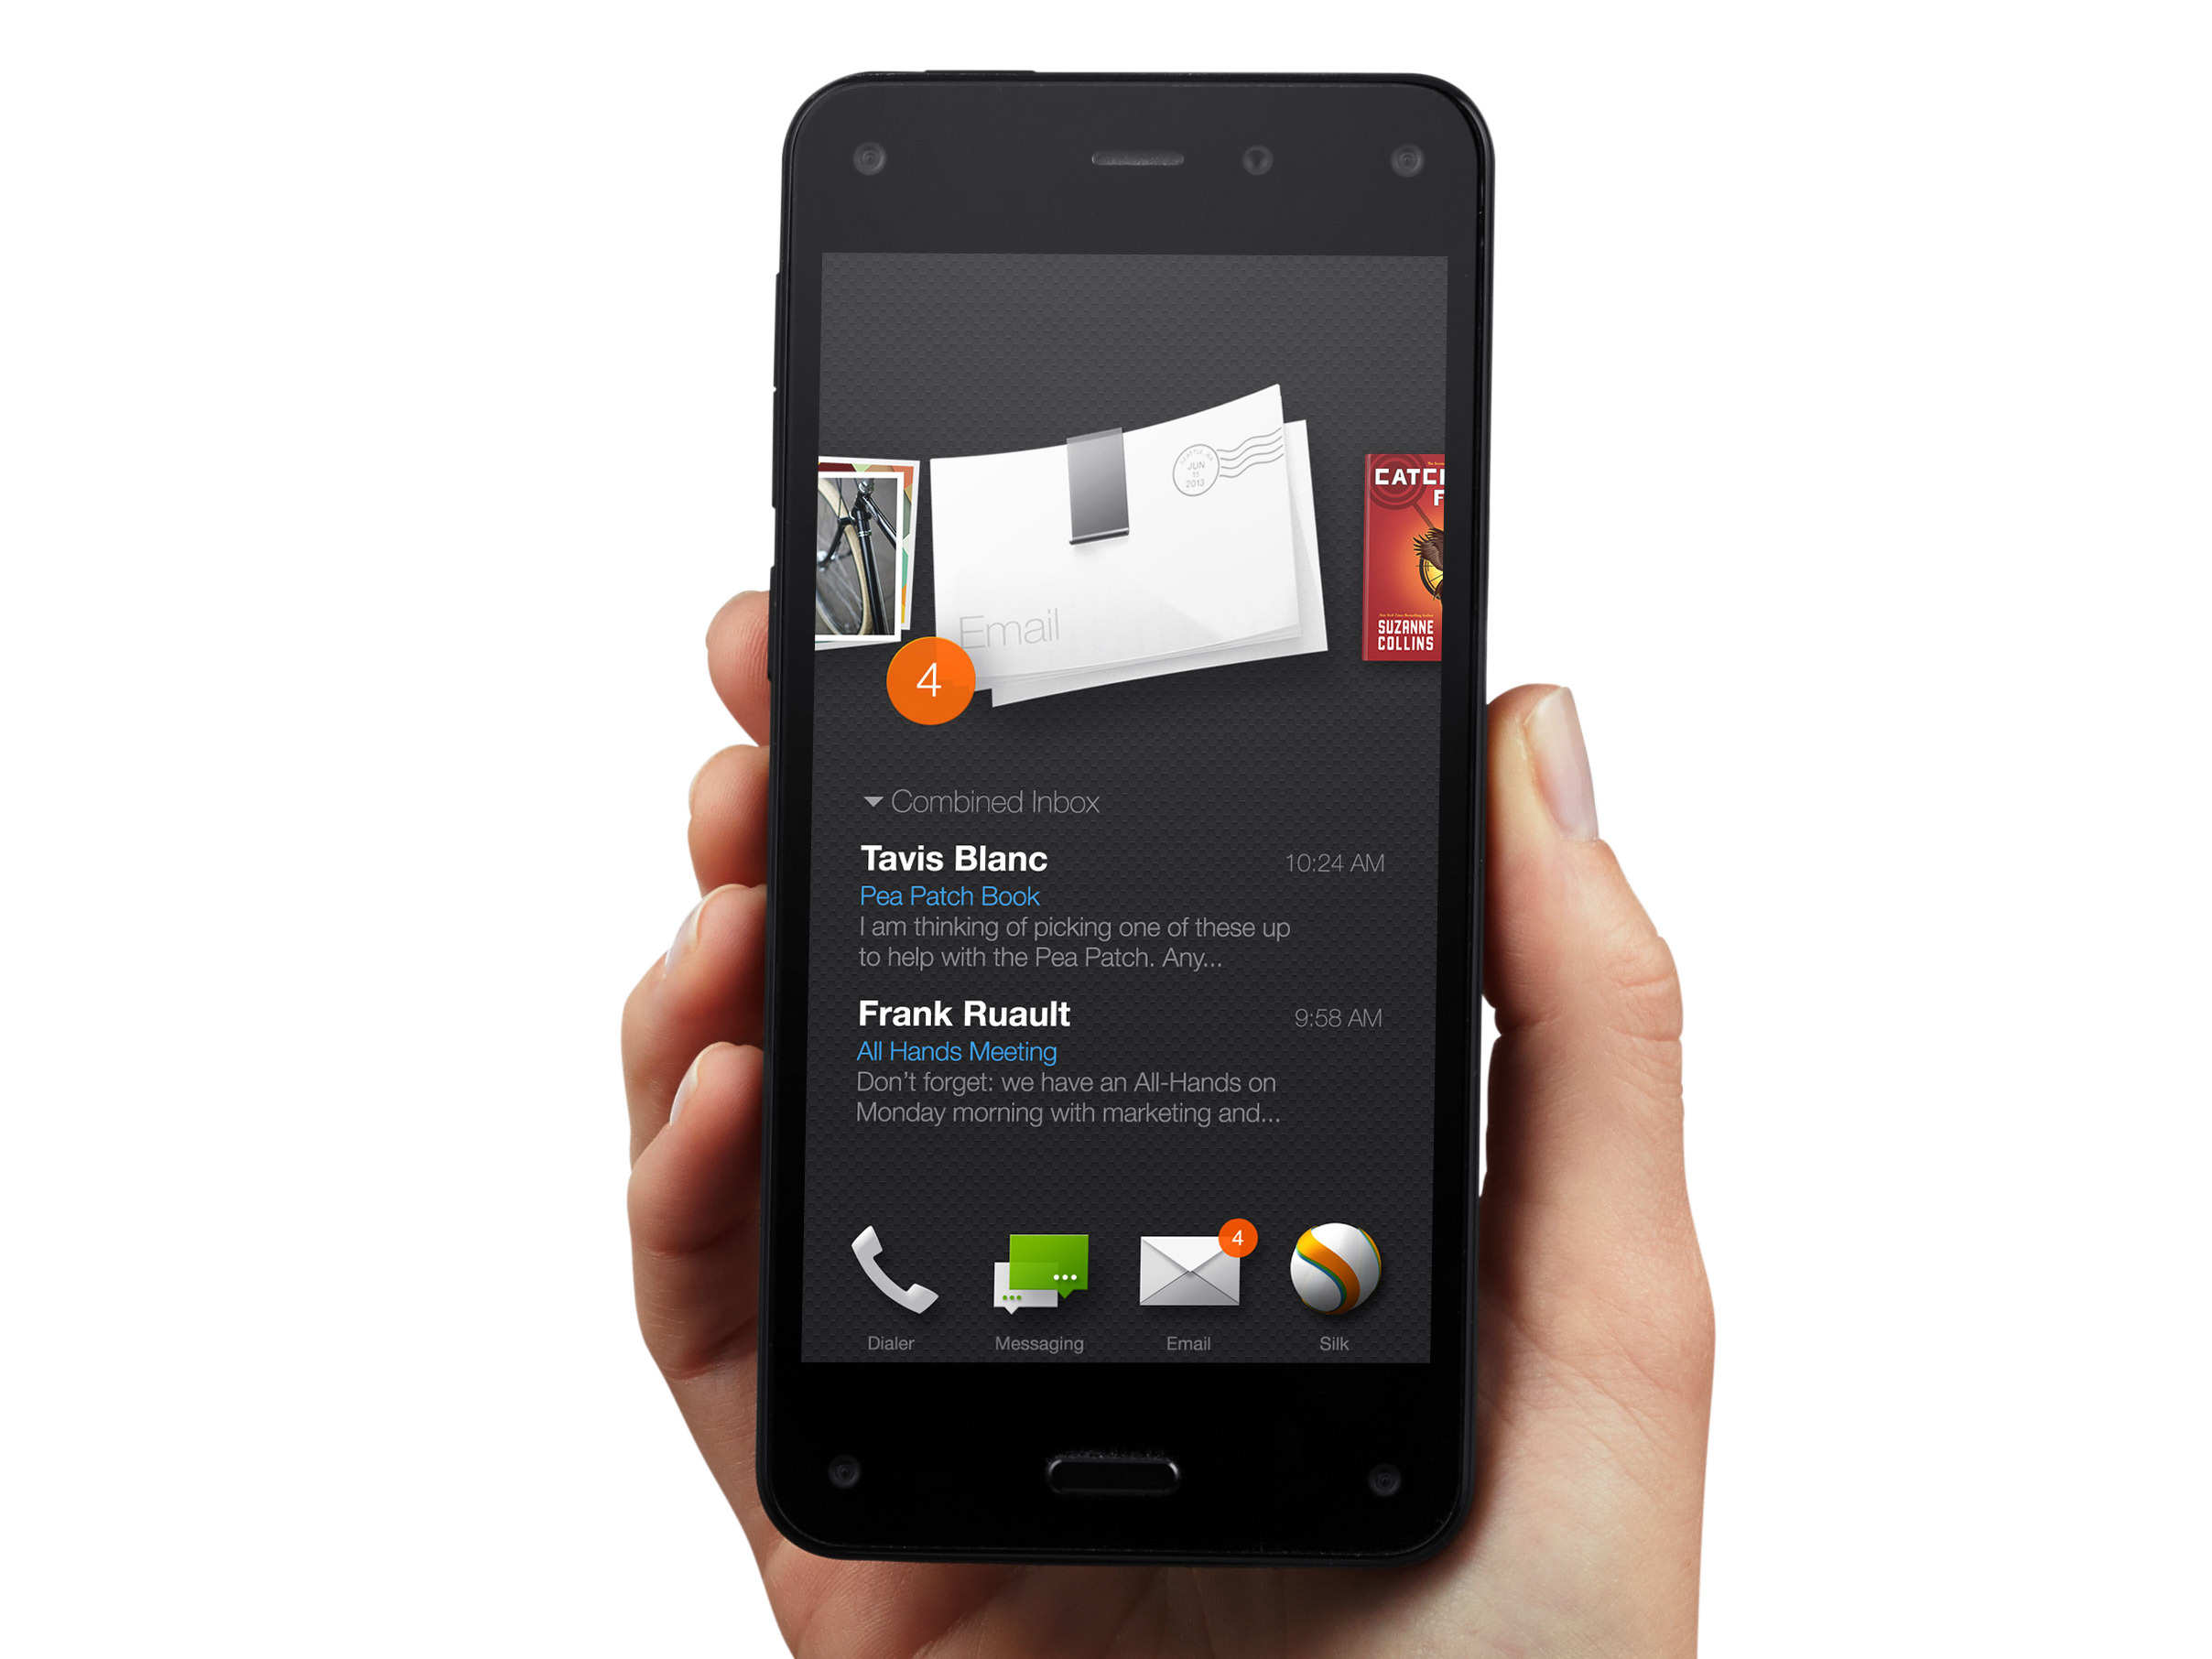 Amazon Fire Phone vs Apple iPhone 5s: the weigh-in